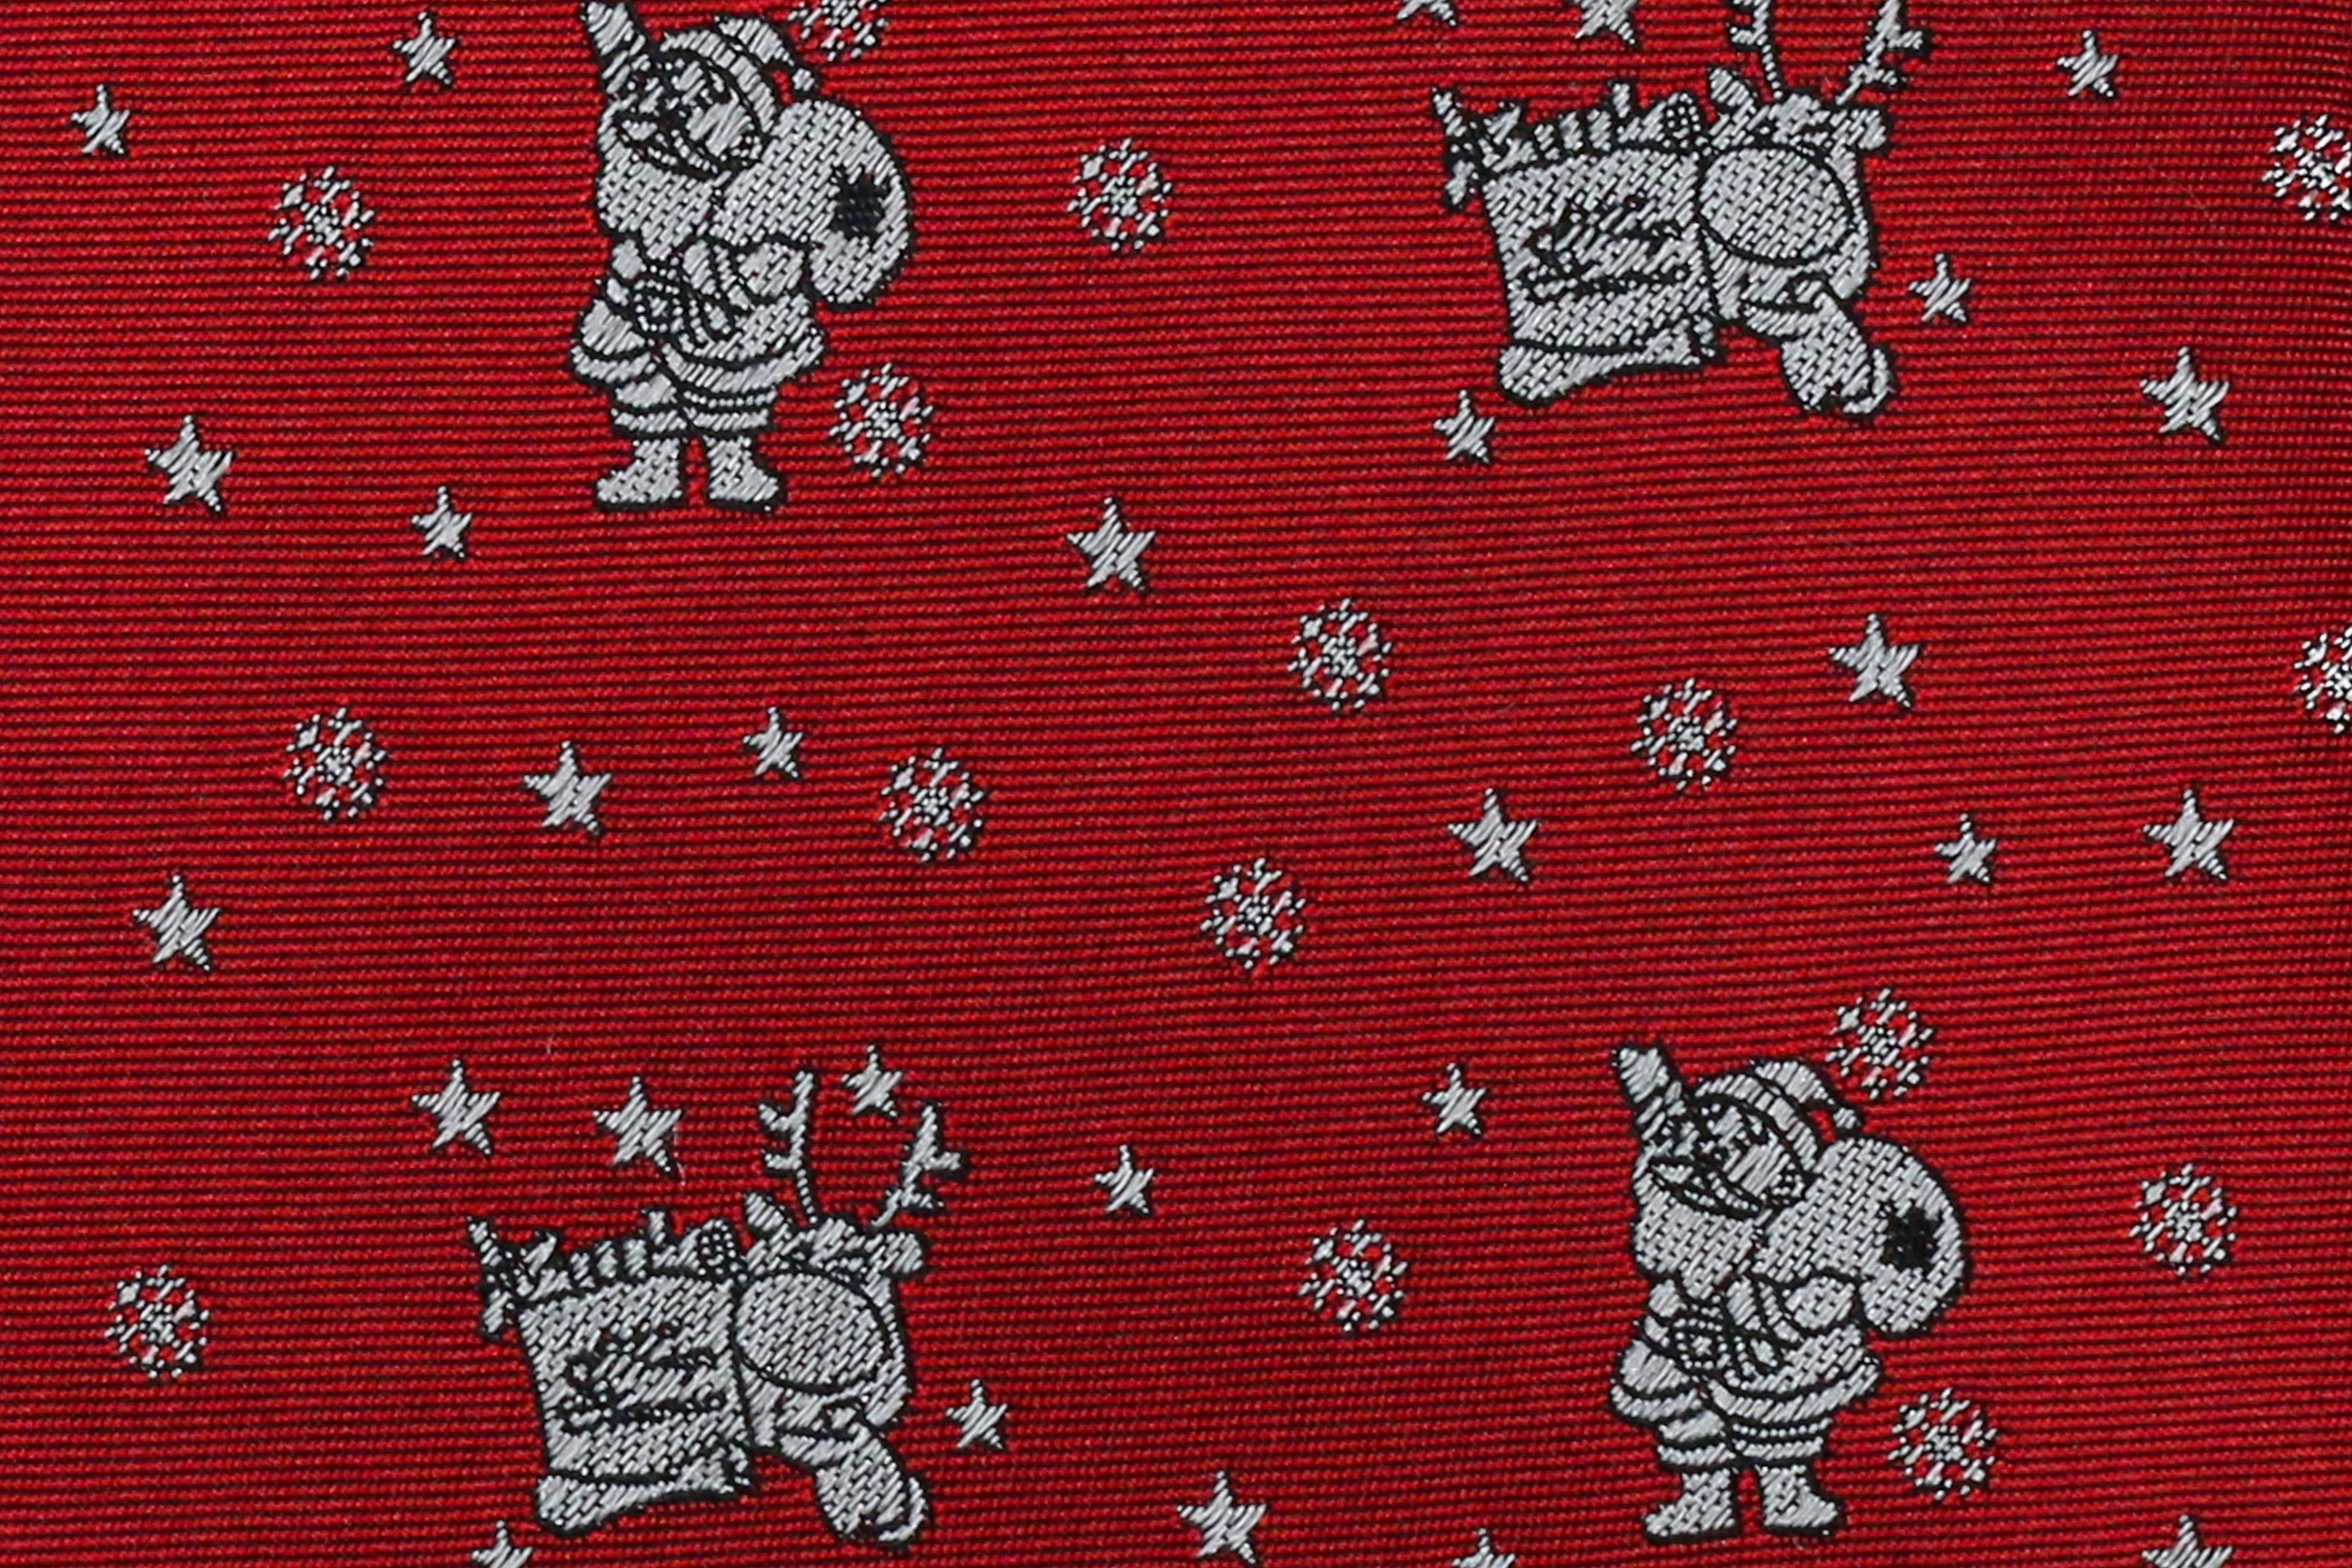 100% Silk Extra Long Tie - Red with Santa and Reindeer for Big and Tall Men